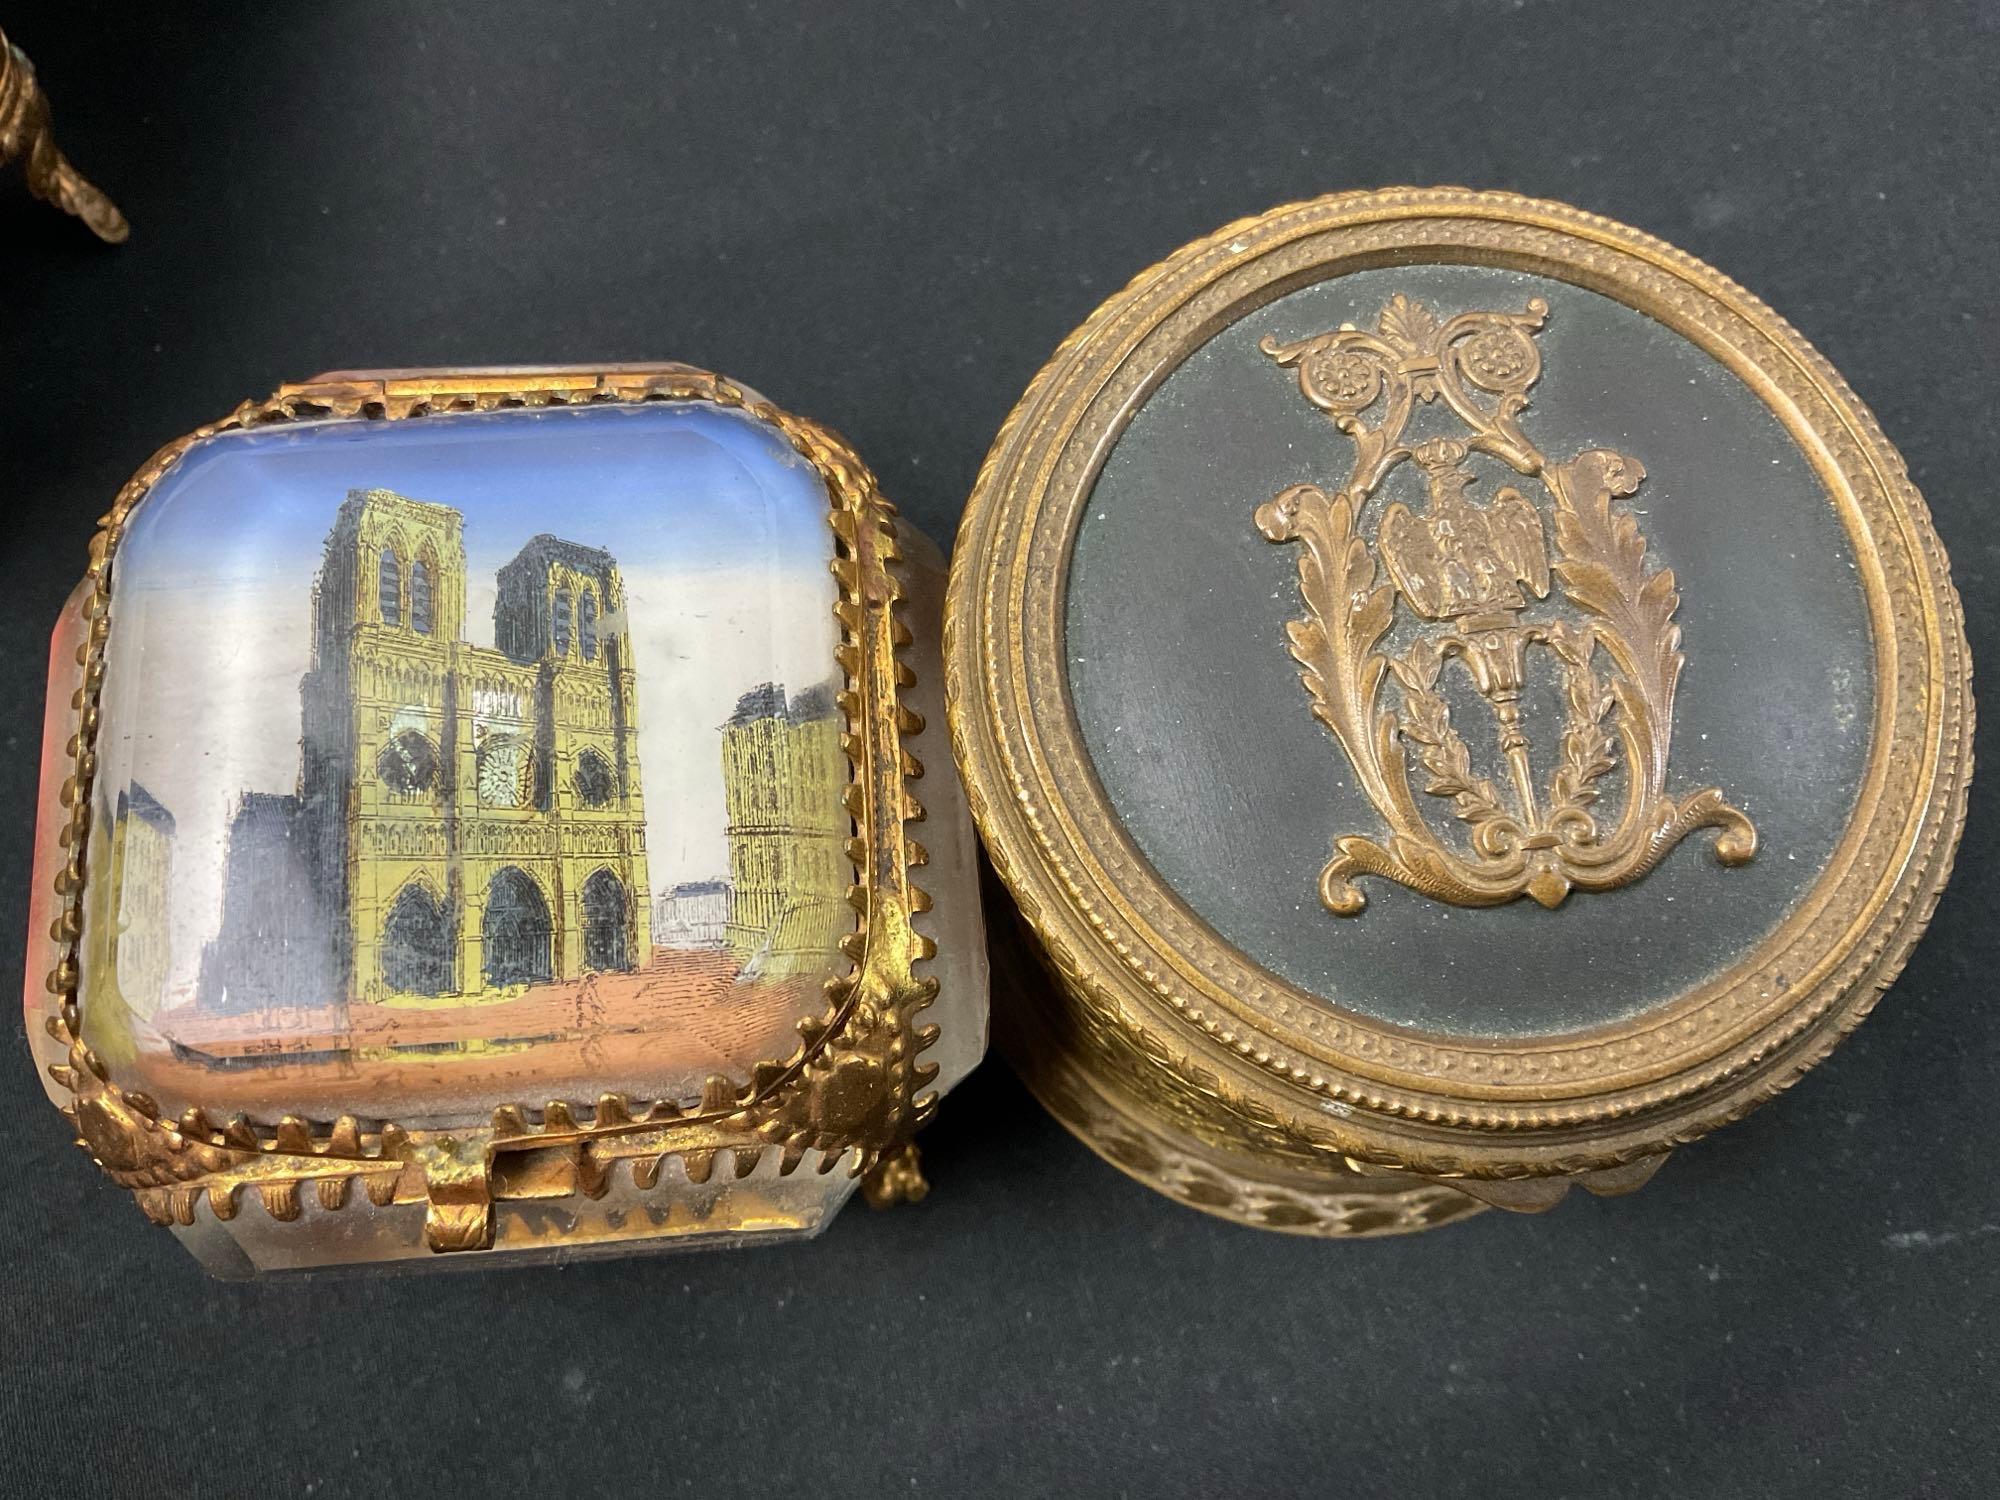 Trio of Antique Ornate Jewelry Boxes, Brass Cylinder w/ emblemed lid, Notre Dame & Sacre-Coeur Bo...